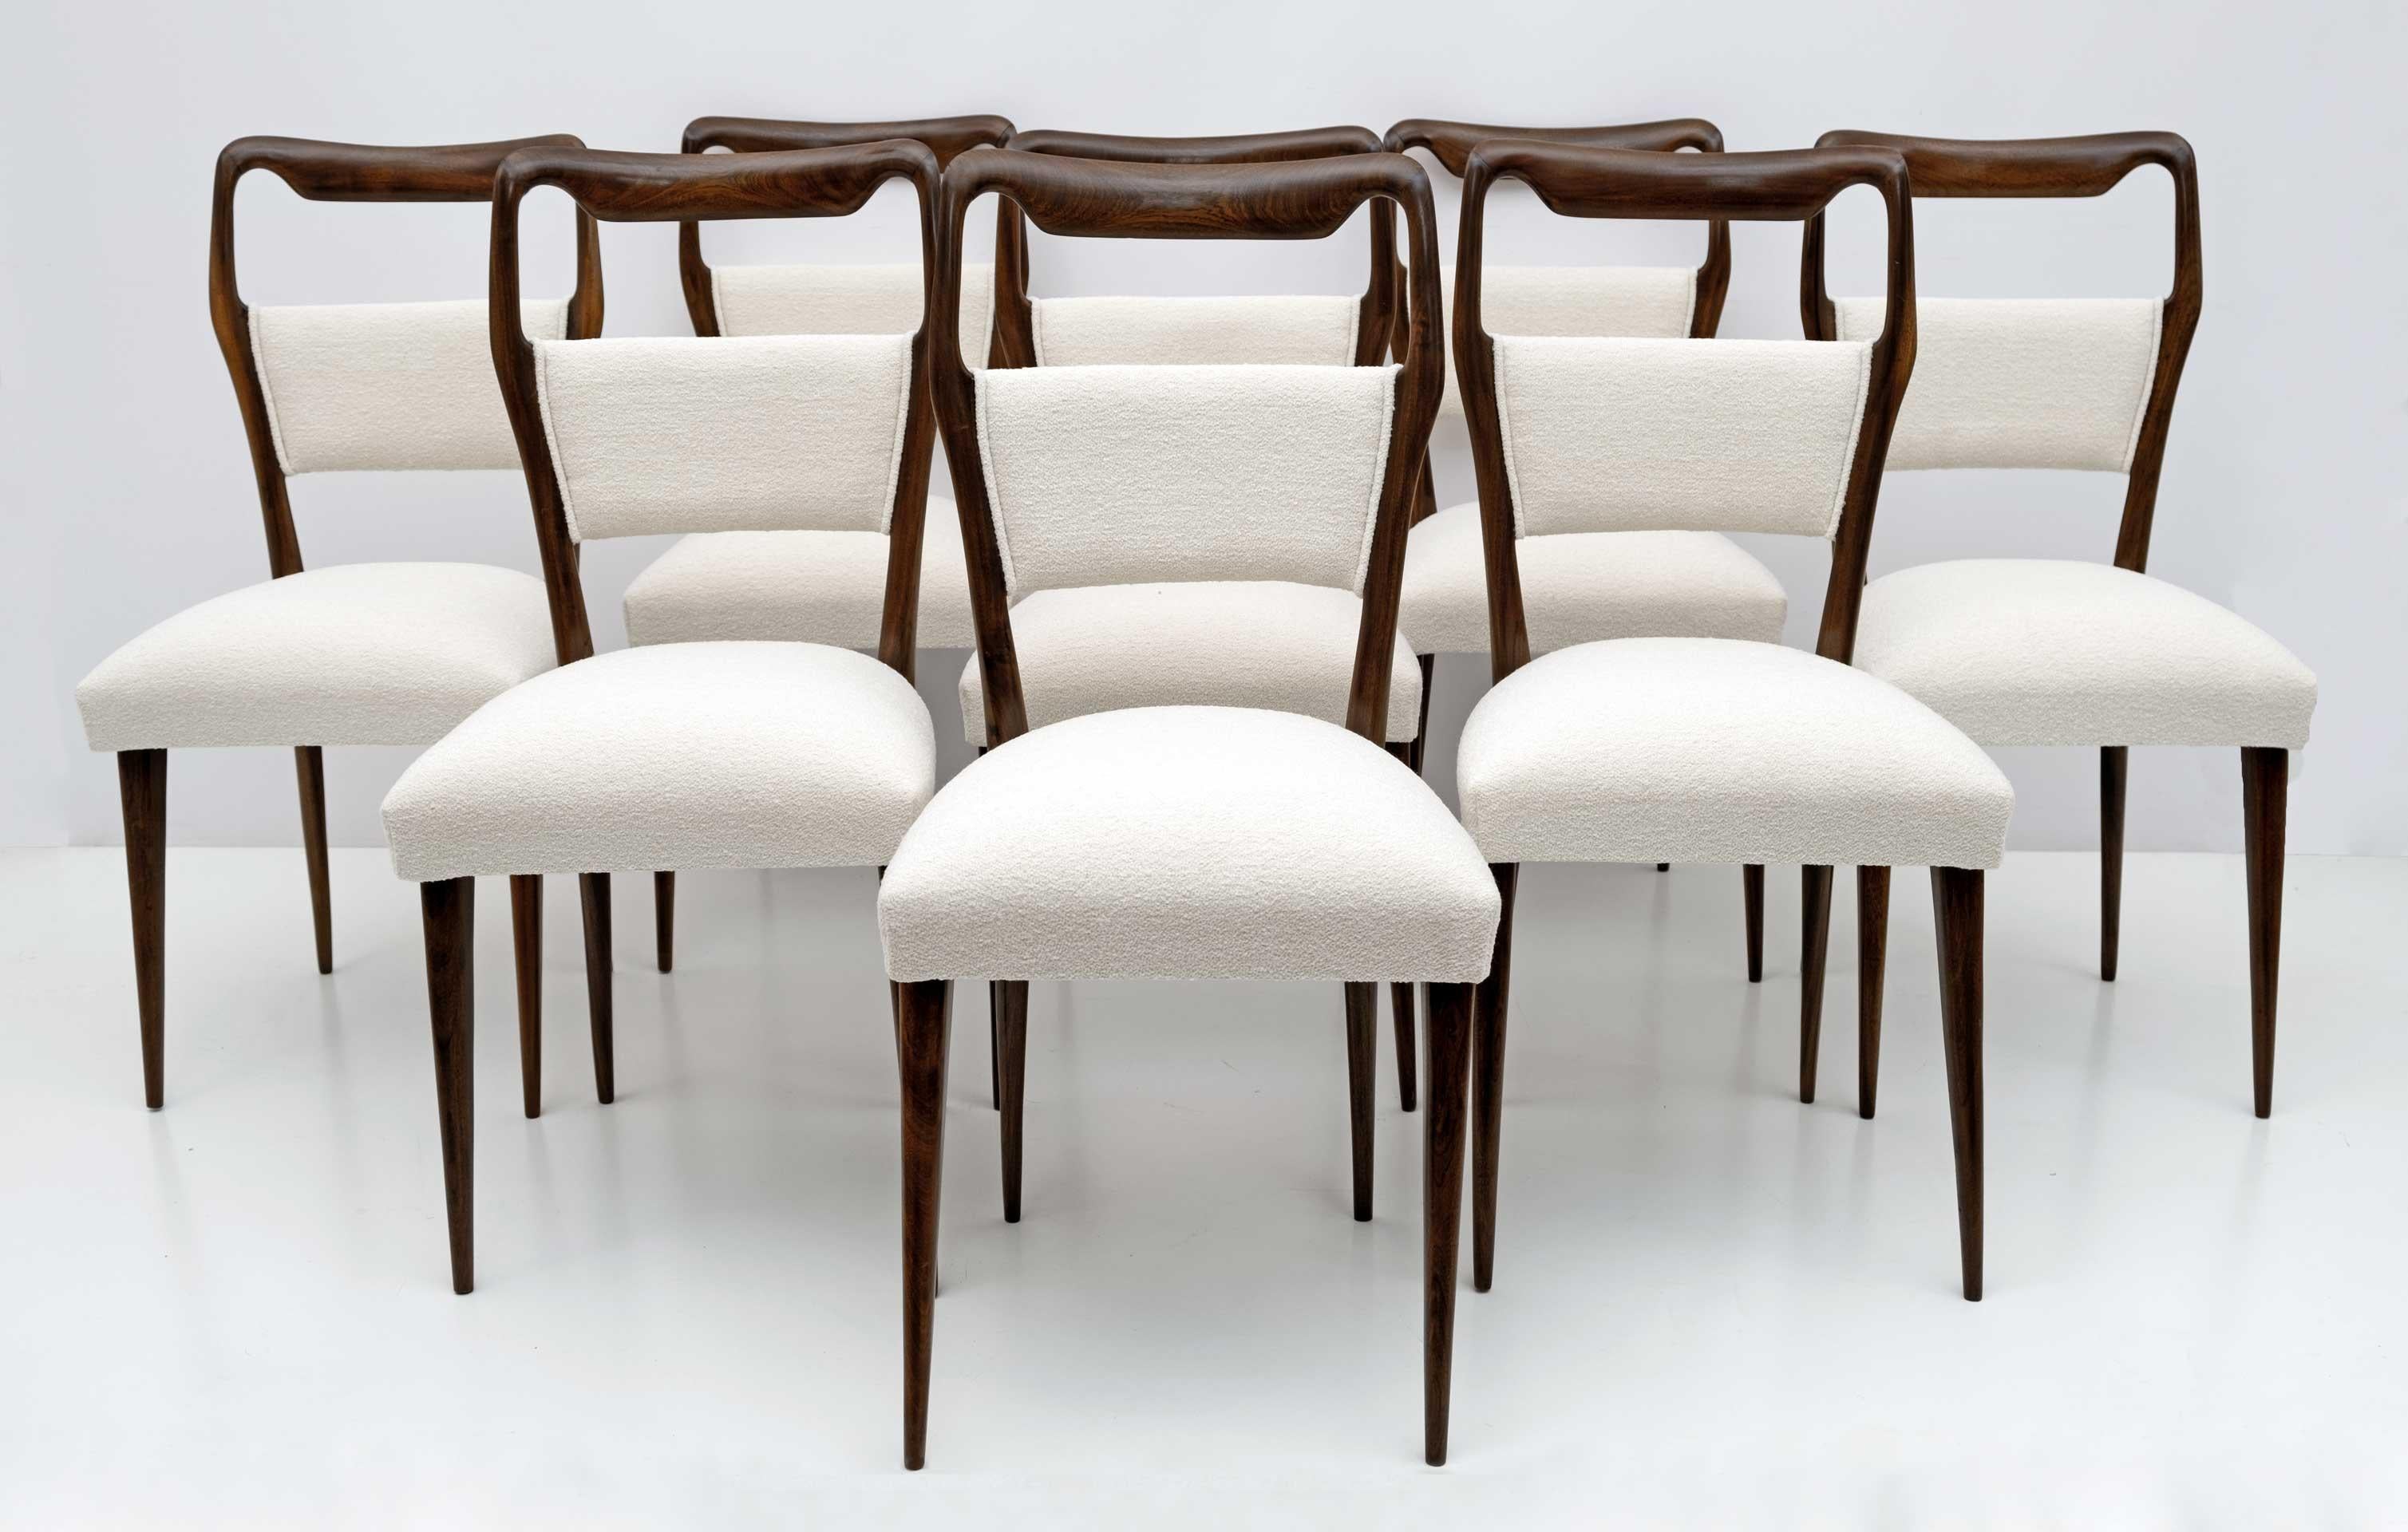 Gorgeous set of eight Italian Vittorio Dassi midcentury dining chairs recently upholstered in ivory Bouclè fabric, restored and polished with shellac.